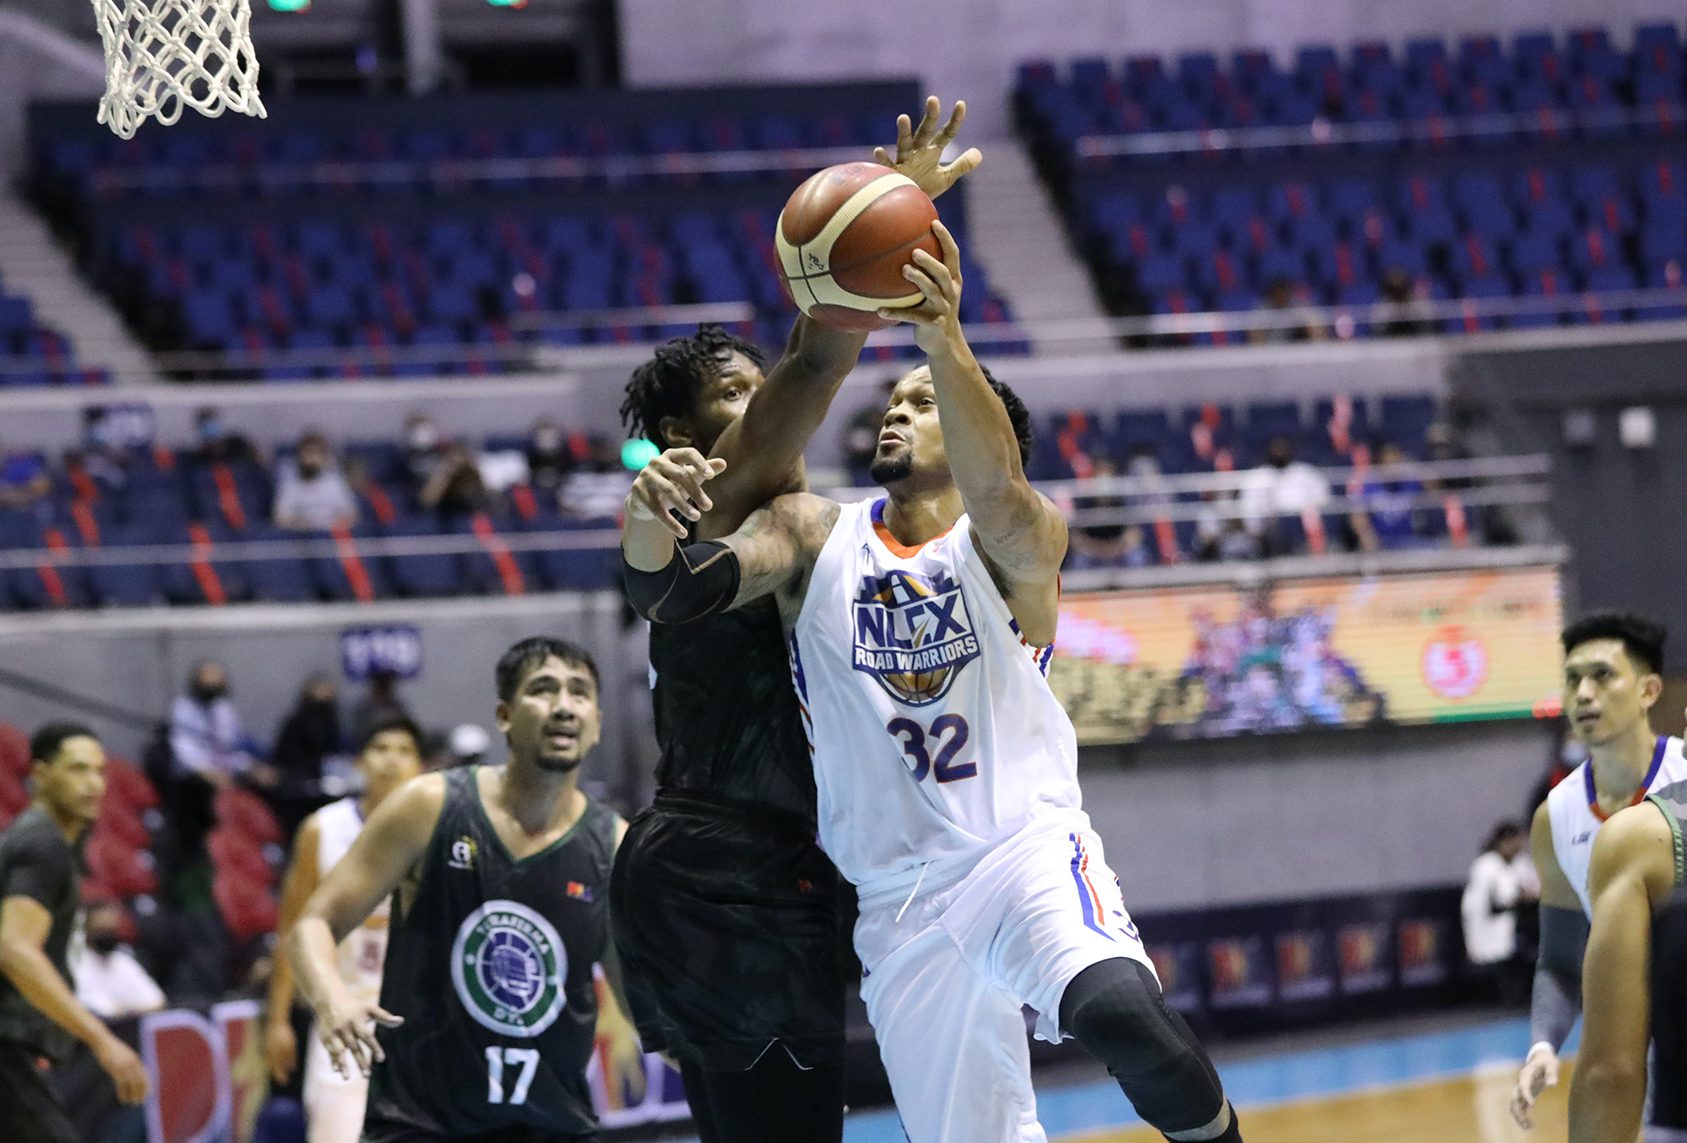 PBA: NLEX to parade new import as KJ McDaniels set to fly home